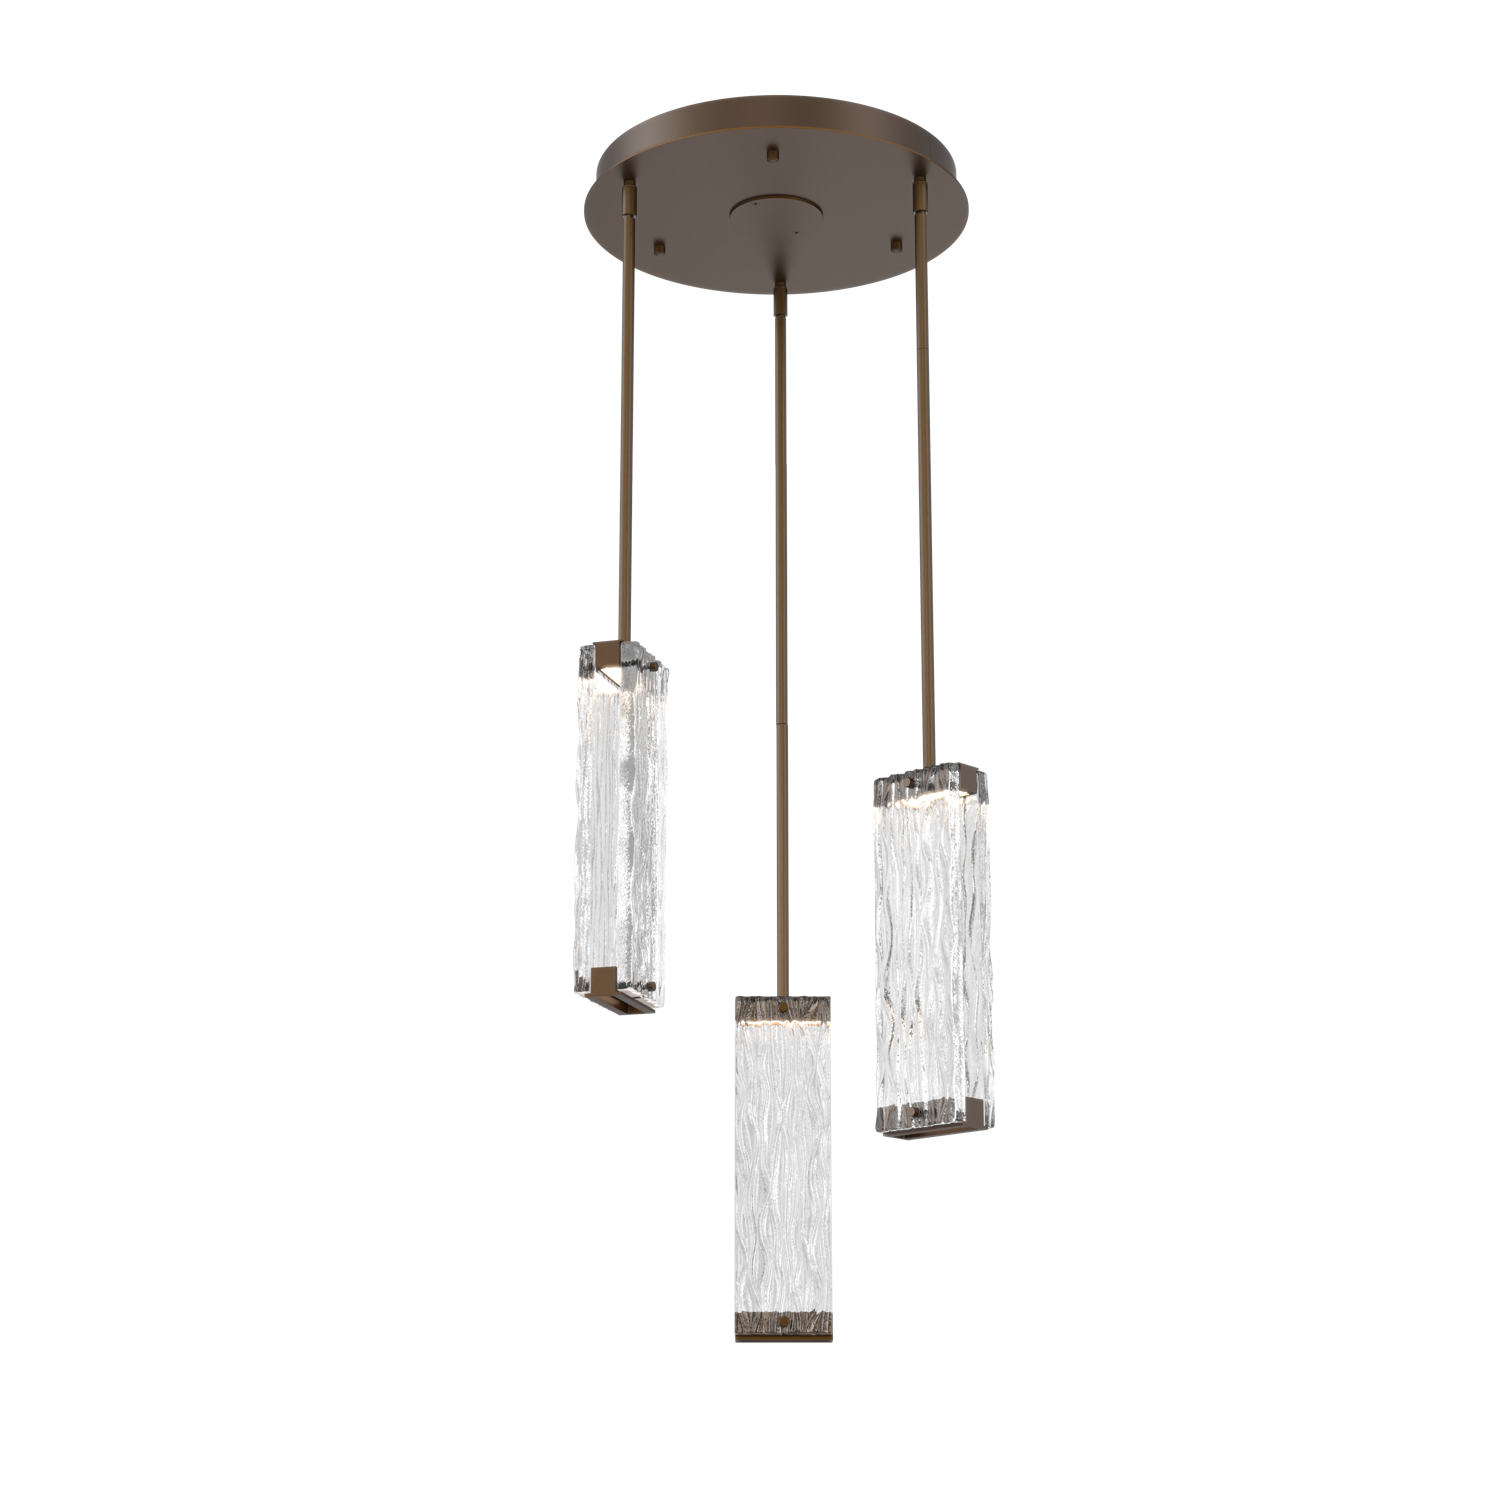 CHB0090-03-FB-TT-Hammerton-Studio-Tabulo-3-light-multi-pendant-chandelier-with-flat-bronze-finish-and-clear-tidal-cast-glass-shade-and-LED-lamping